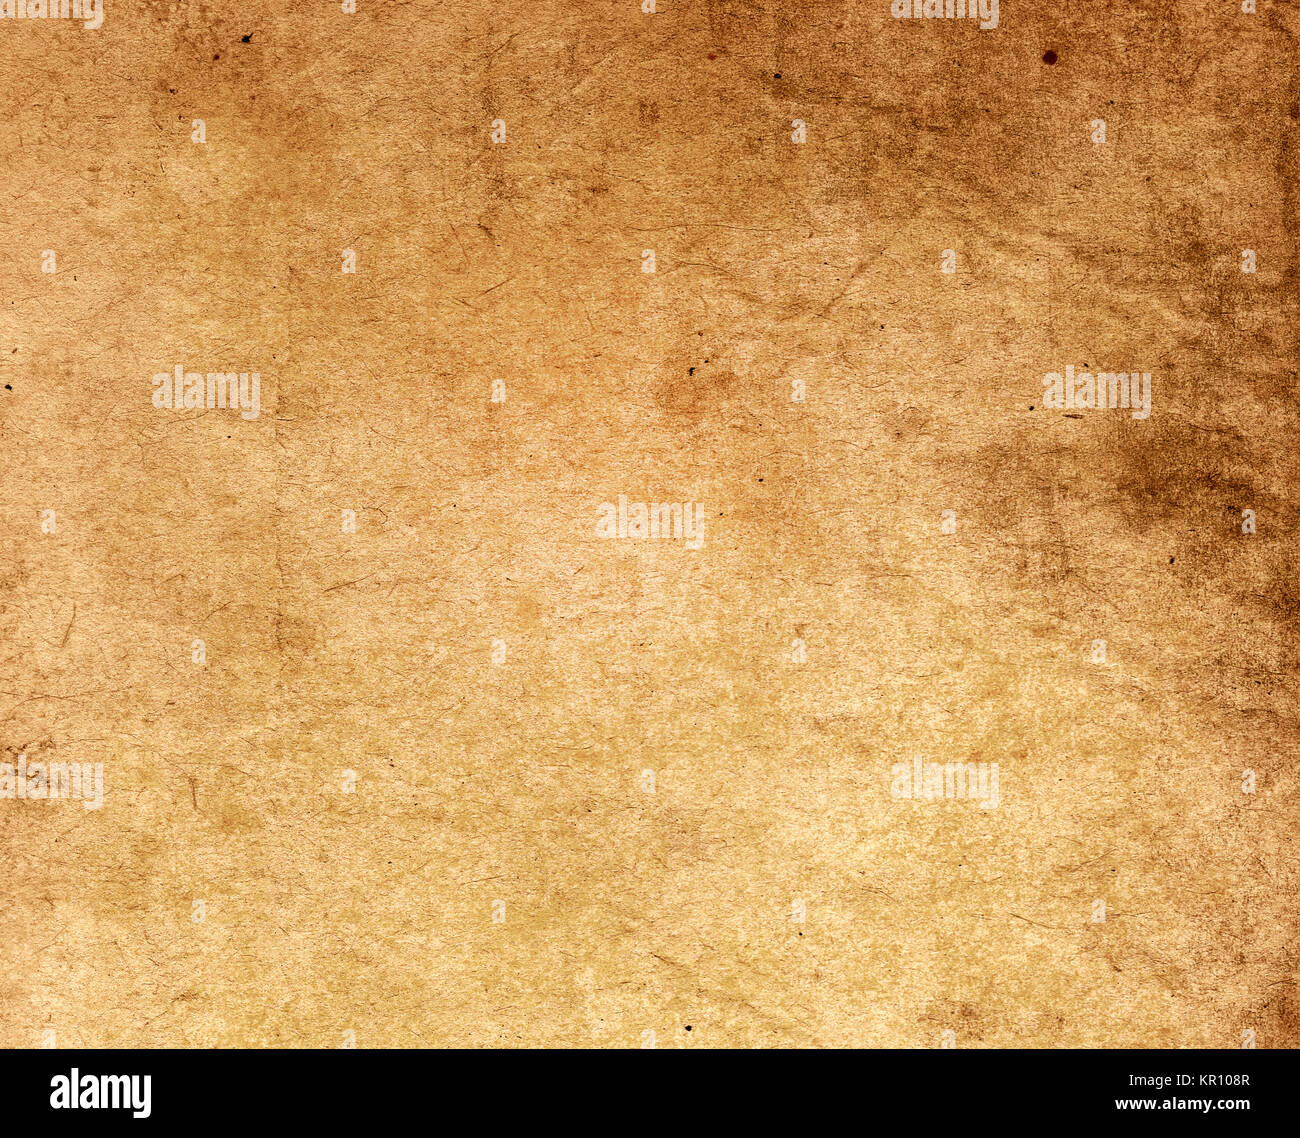 Old paper close up background. Natural texture of old grunge paper. Stock Photo